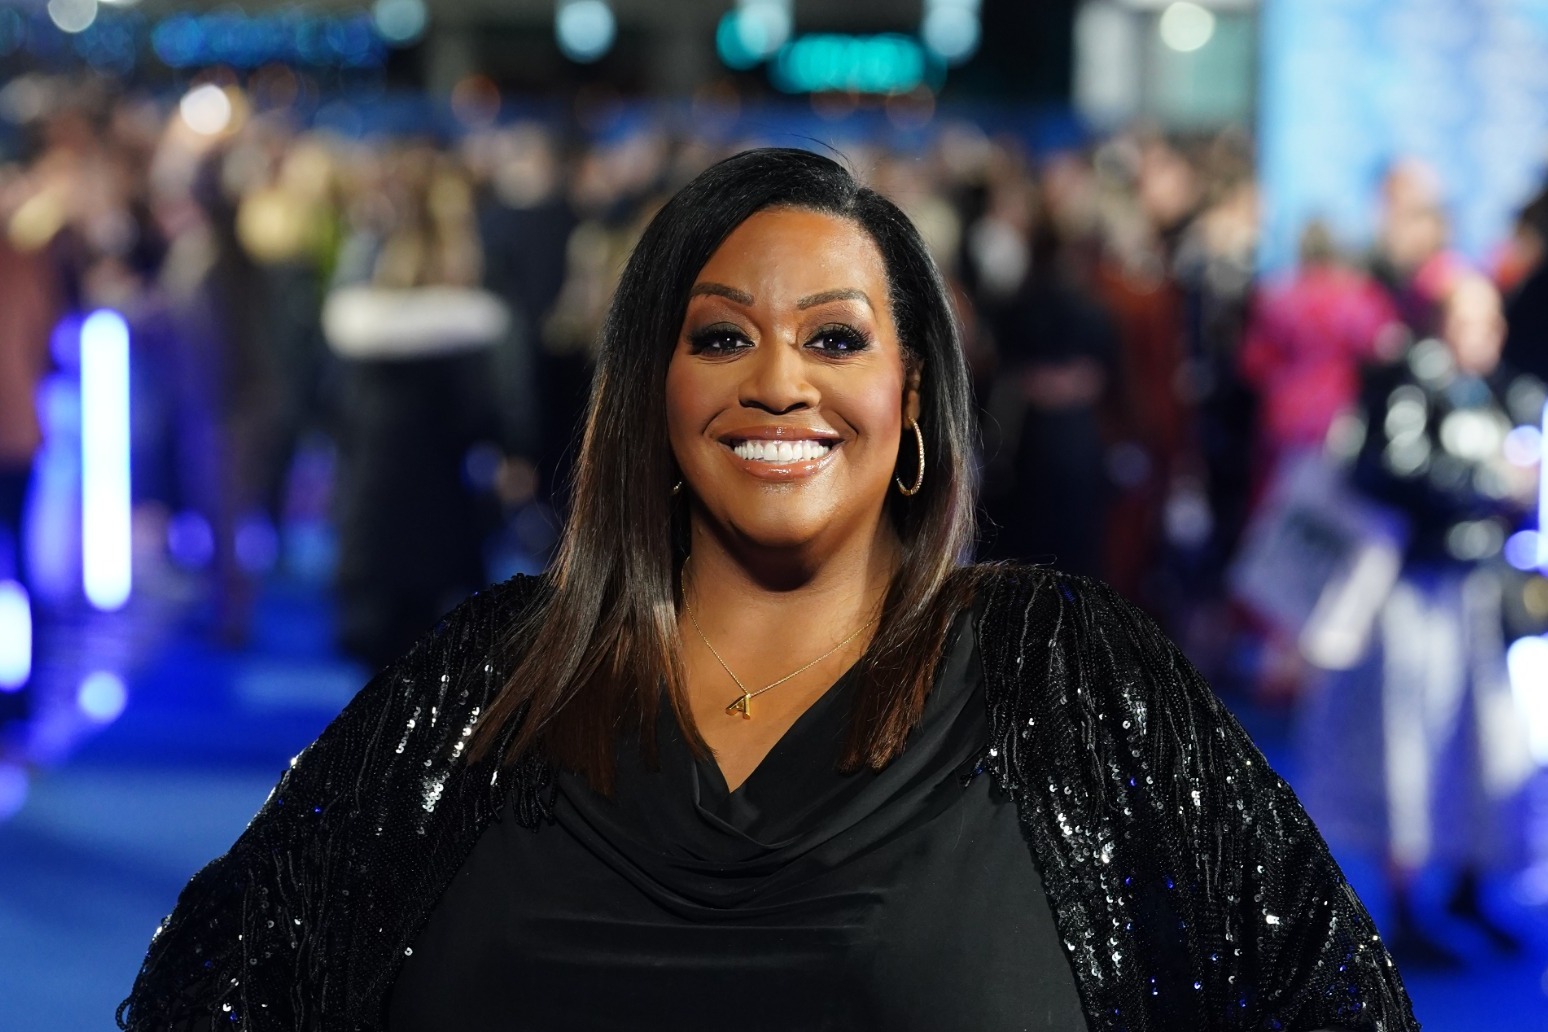 Alison Hammond and Dermot O’Leary to fill in as interim This Morning hosts 